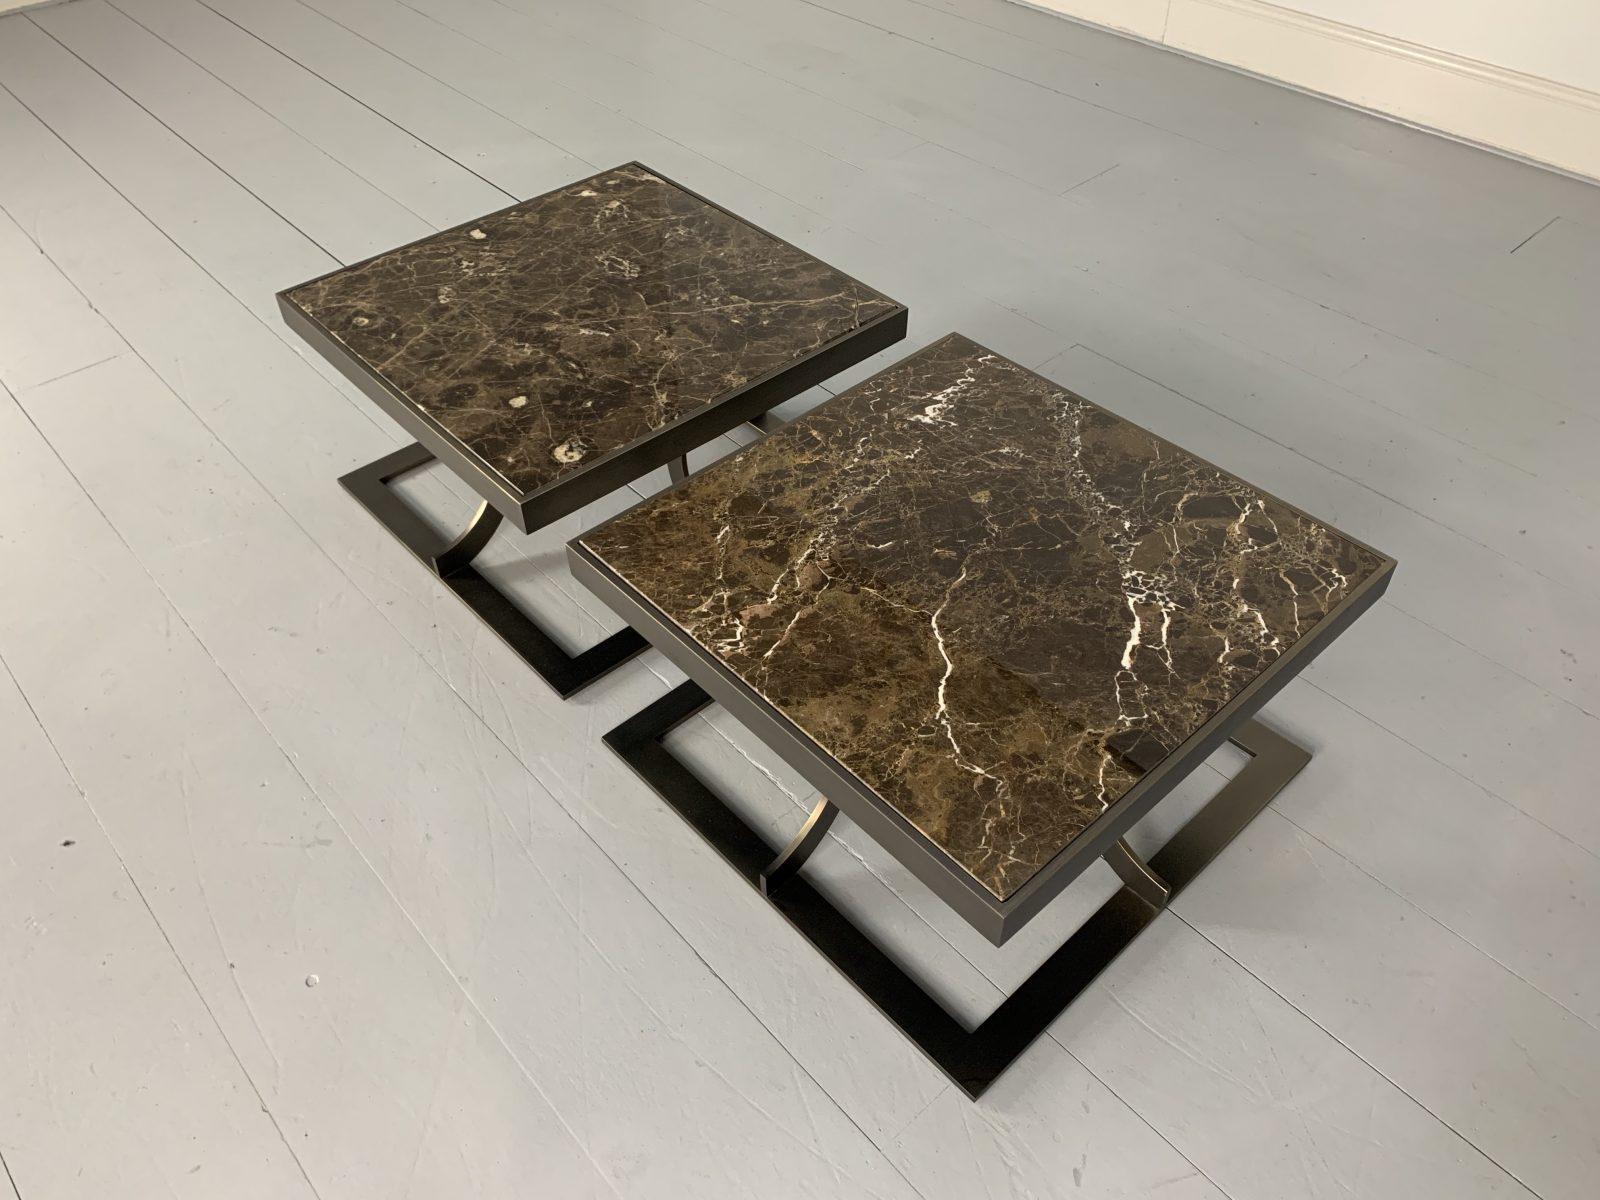 Pair of Baxter of Italy “Paul” Sofa Side Coffee Tables in “Emperador” Marble In Good Condition For Sale In Barrowford, GB